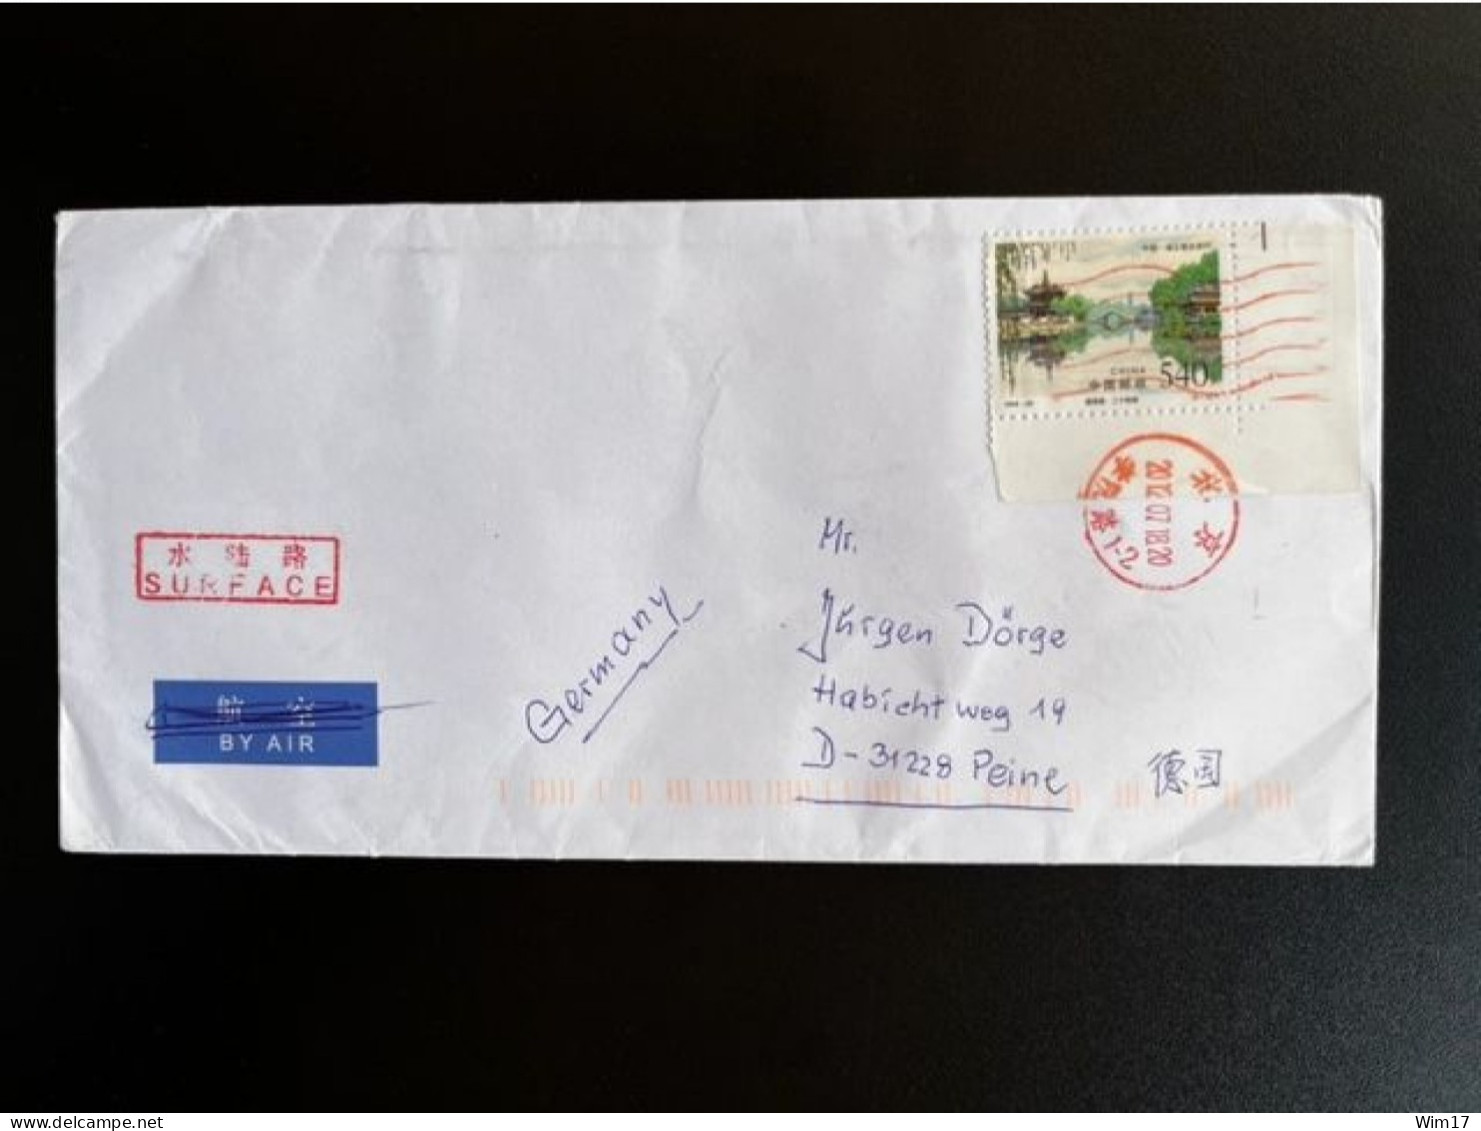 CHINA 2012 LETTER XI'AN TO PEINE GERMANY 18-07-2012 - Briefe U. Dokumente